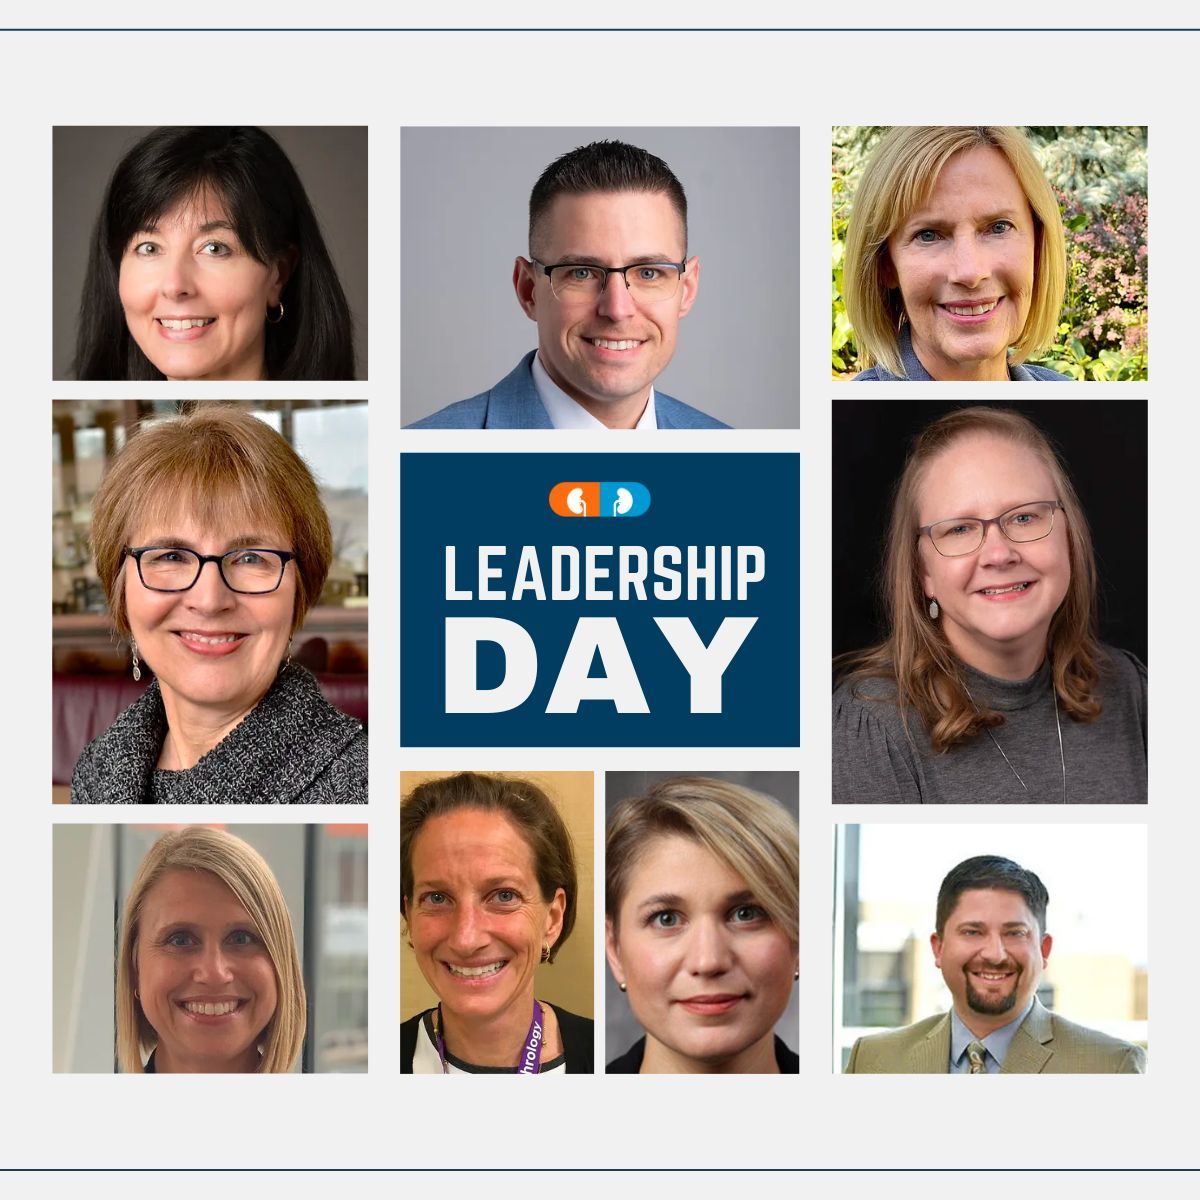 On #LeadershipDay, we want to honor and celebrate our incredible AKHOMM leaders. Advancing Kidney Health through Optimal Medication Management wouldn't be possible without their unwavering commitment and exceptional leadership!